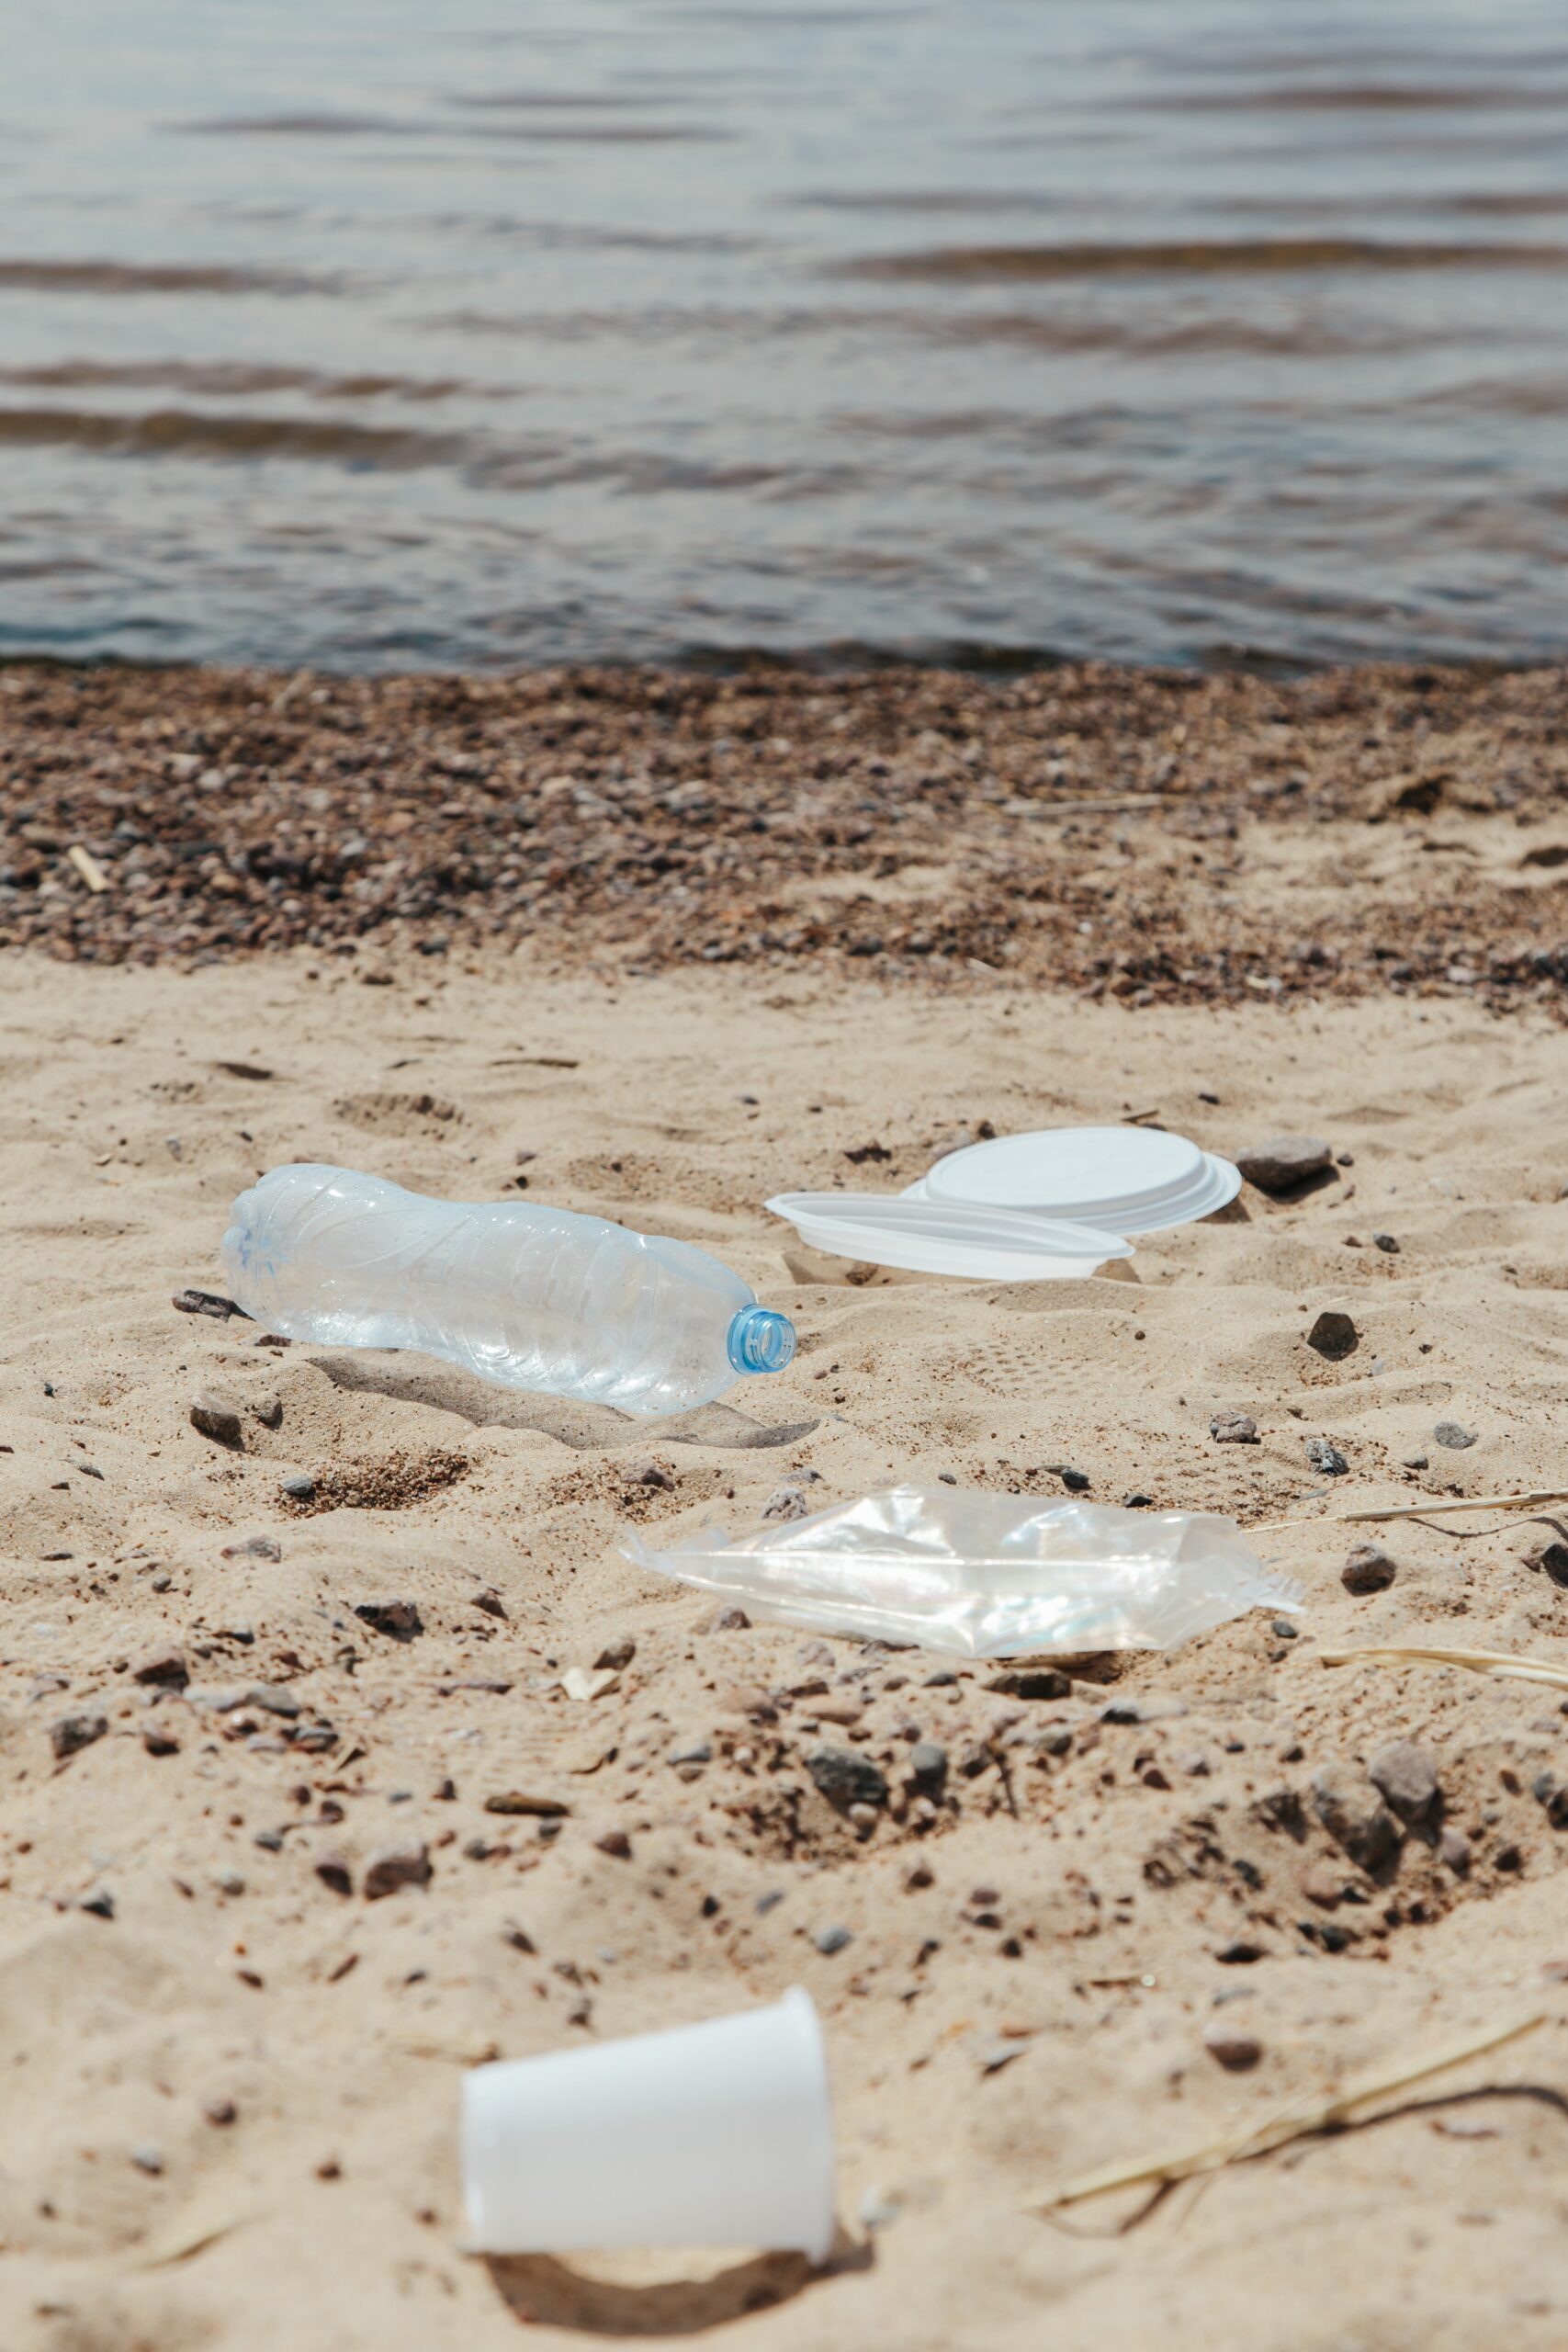 Plastic trash on beach by Ron-Lach-9034666 from Pexels